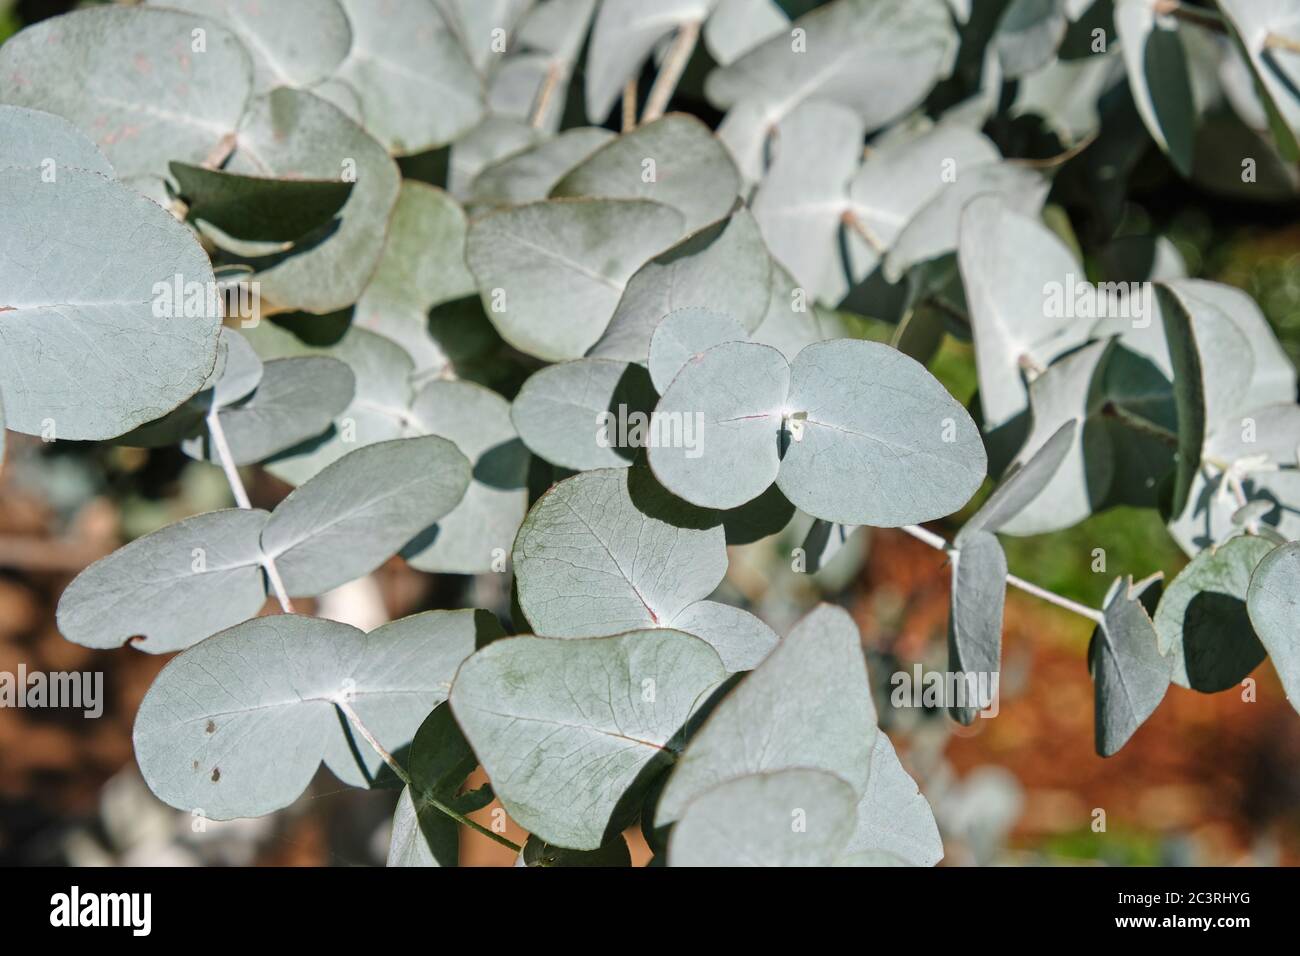 Eucalyptus cinerea leaves and branches closeup showing the distinctive grey-green foliage. Stock Photo